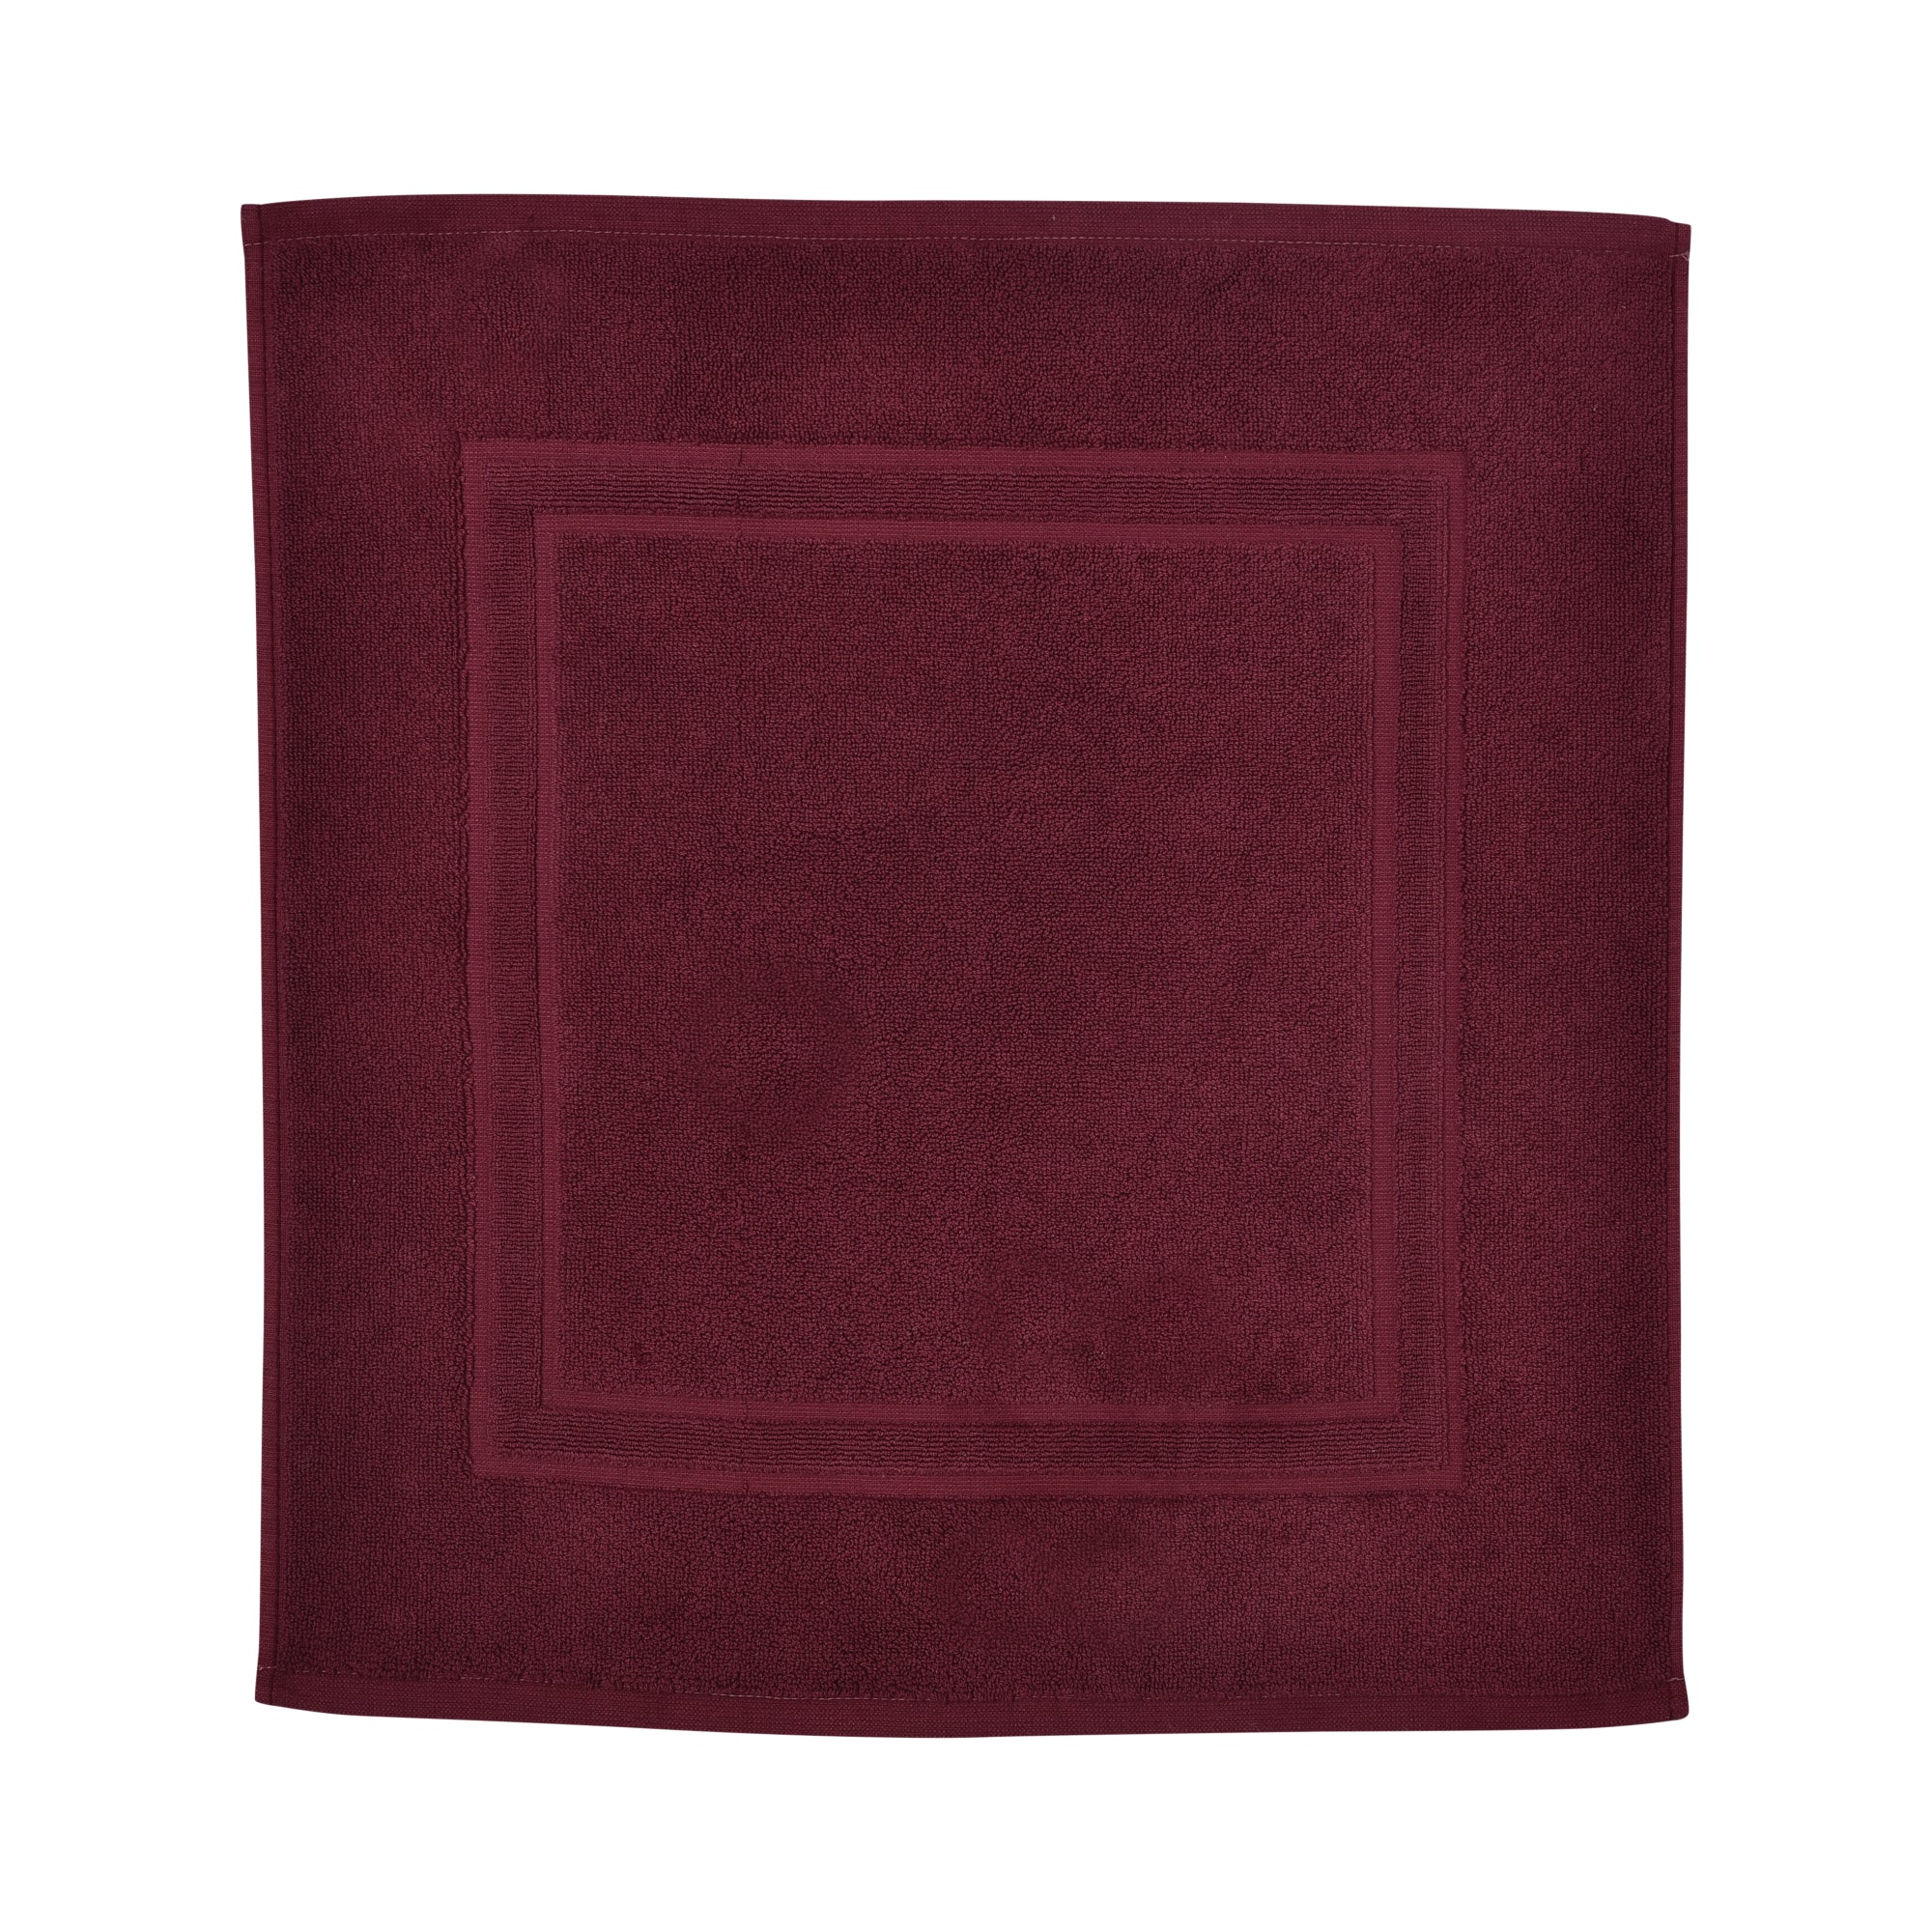 Shower Mat Abode Eco by Drift Home in Claret